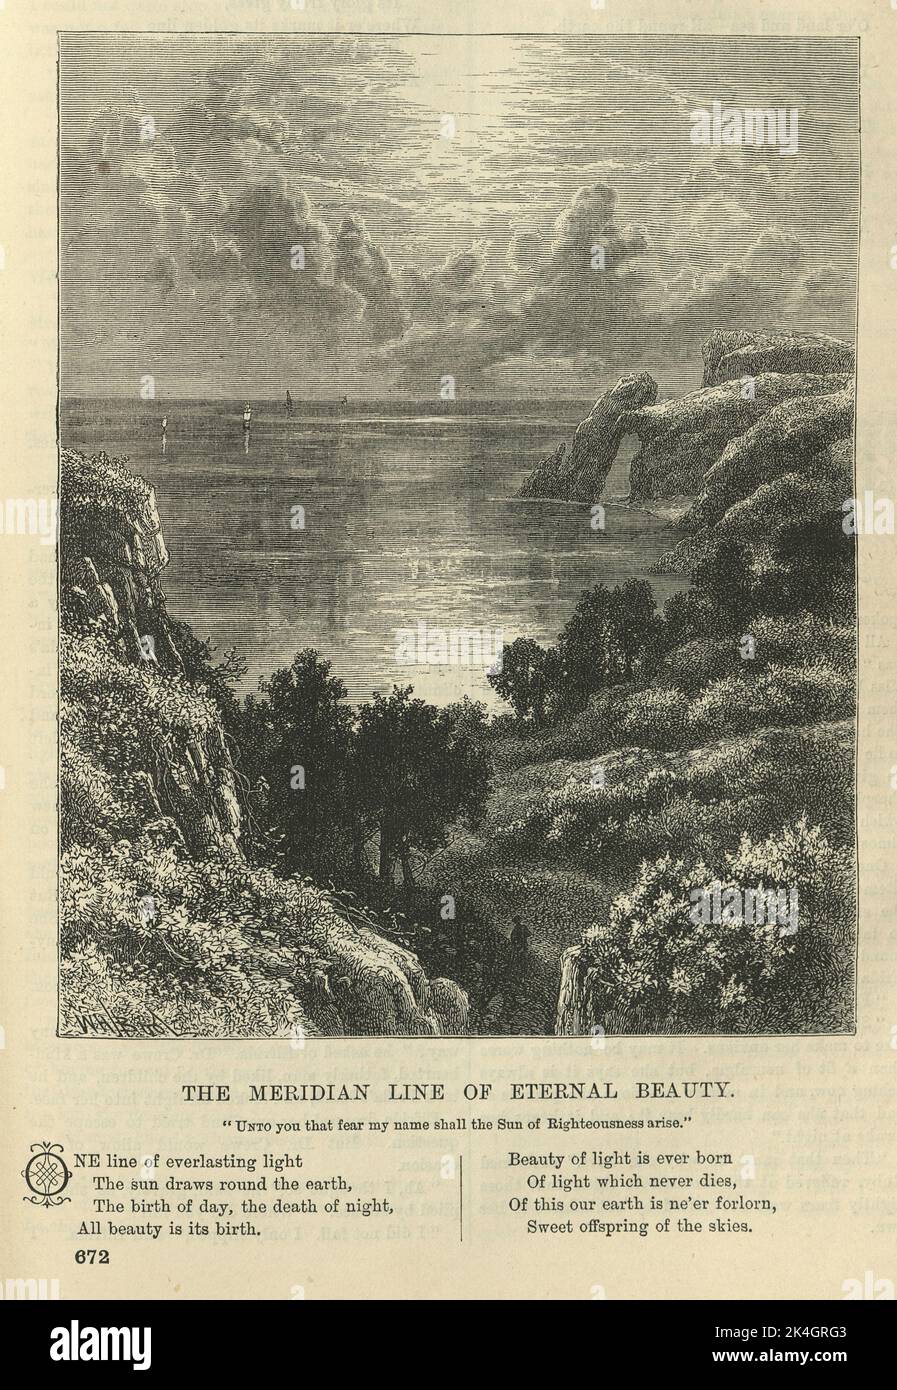 Illustration for Victorian poem The Meridian line of eternal beauty, 1870s, 19th Century, Seascape Stock Photo